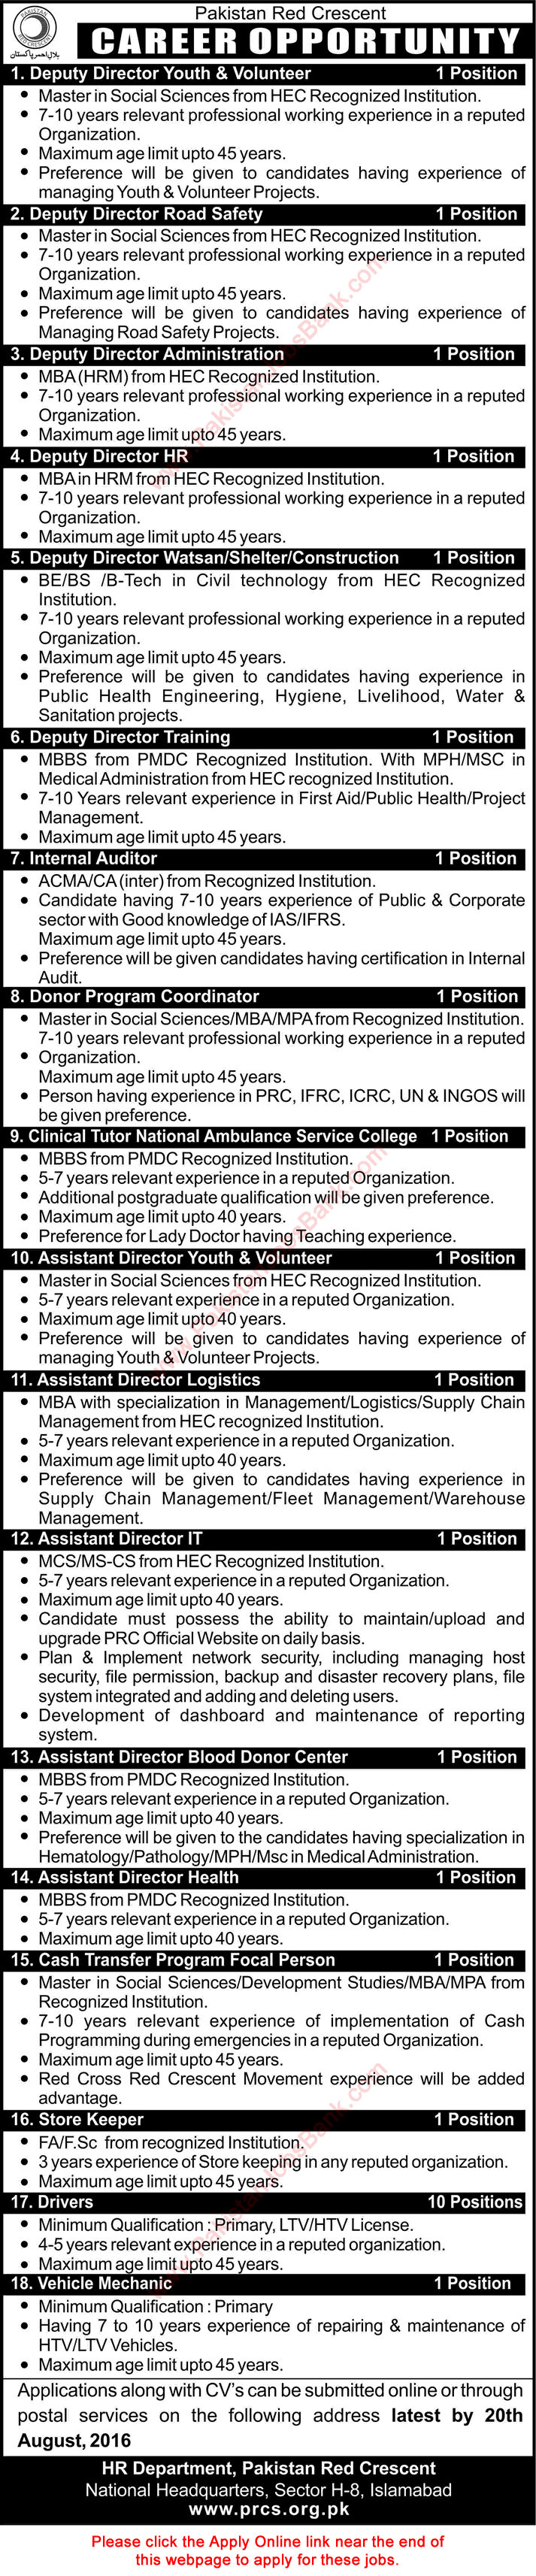 Pakistan Red Crescent Society Jobs August 2016 PRCS Apply Online Deputy / Assistant Directors & Others Latest